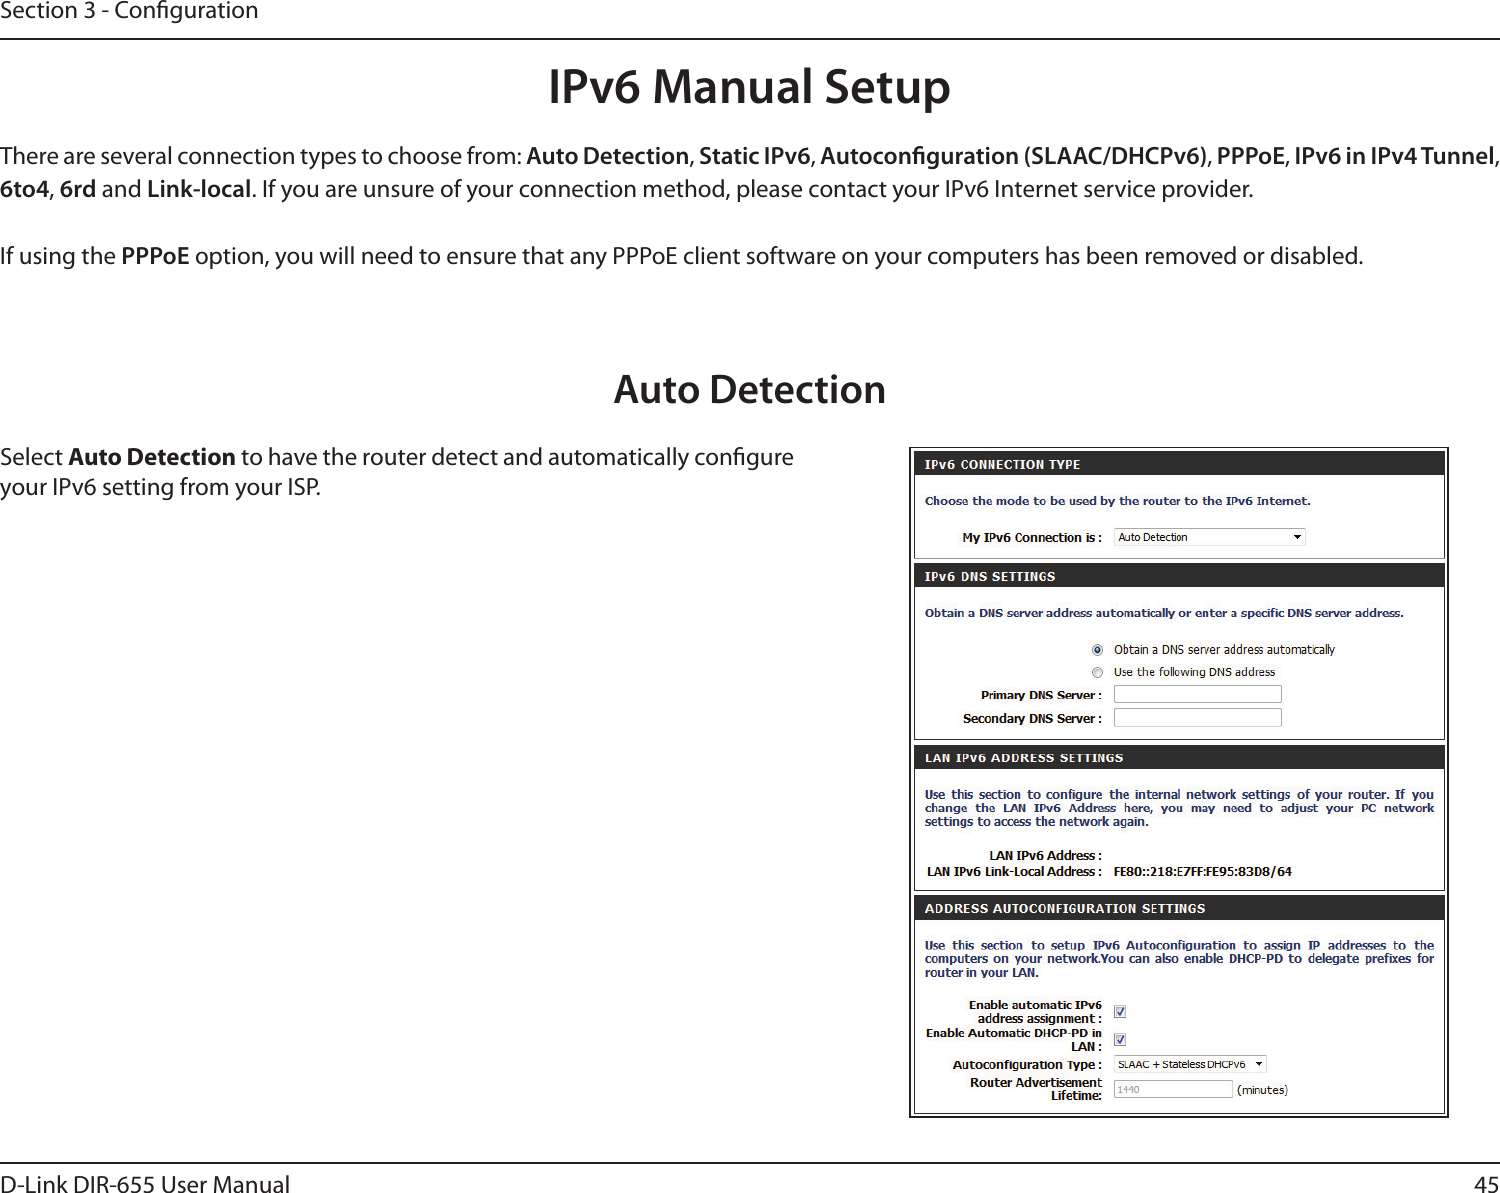 45D-Link DIR-655 User ManualSection 3 - CongurationIPv6 Manual SetupThere are several connection types to choose from: Auto Detection, Static IPv6, Autoconguration (SLAAC/DHCPv6), PPPoE, IPv6 in IPv4 Tunnel, 6to4, 6rd and Link-local. If you are unsure of your connection method, please contact your IPv6 Internet service provider. If using the PPPoE option, you will need to ensure that any PPPoE client software on your computers has been removed or disabled.Auto DetectionSelect Auto Detection to have the router detect and automatically congure your IPv6 setting from your ISP.